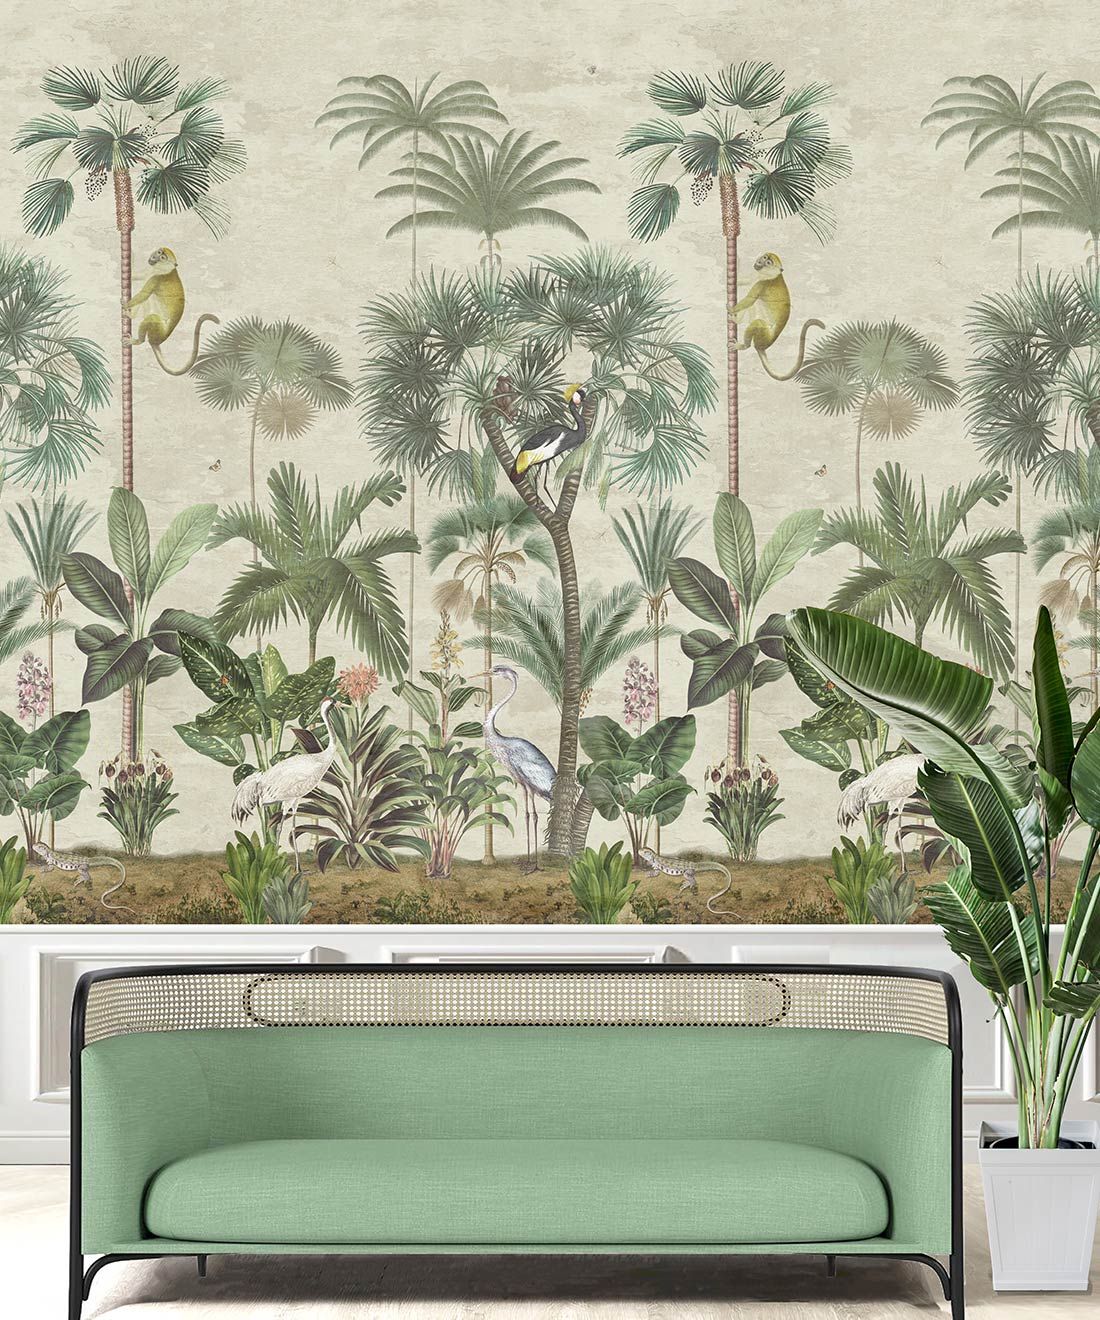 Indian Summer Wallpaper Mural •Bethany Linz • Palm Tree Mural • Aged • Insitu with mint Green sofa